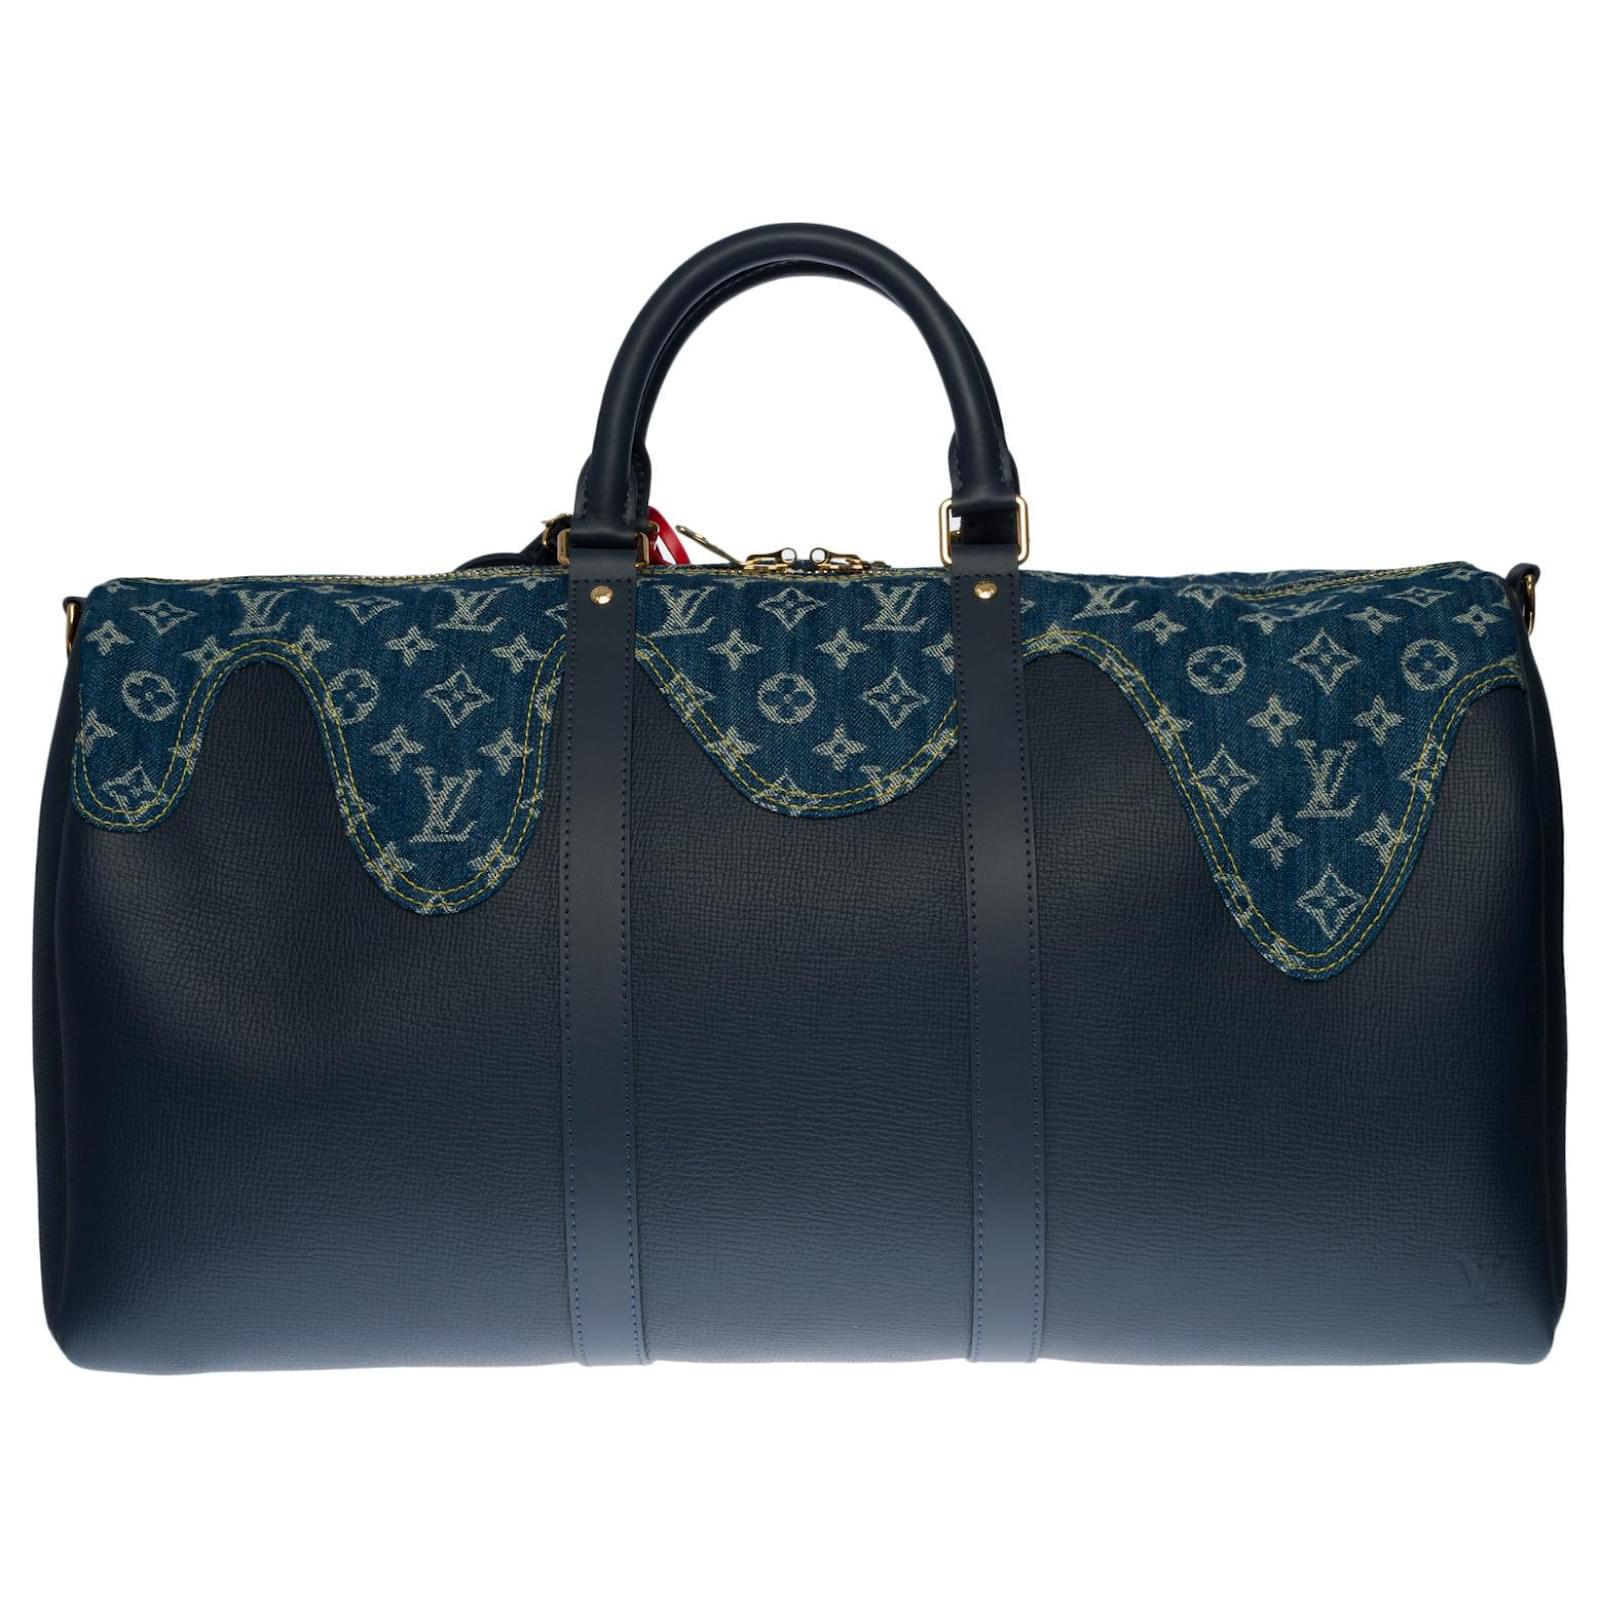 New - Limited edition - Spring Collection 2021 - Louis Vuitton